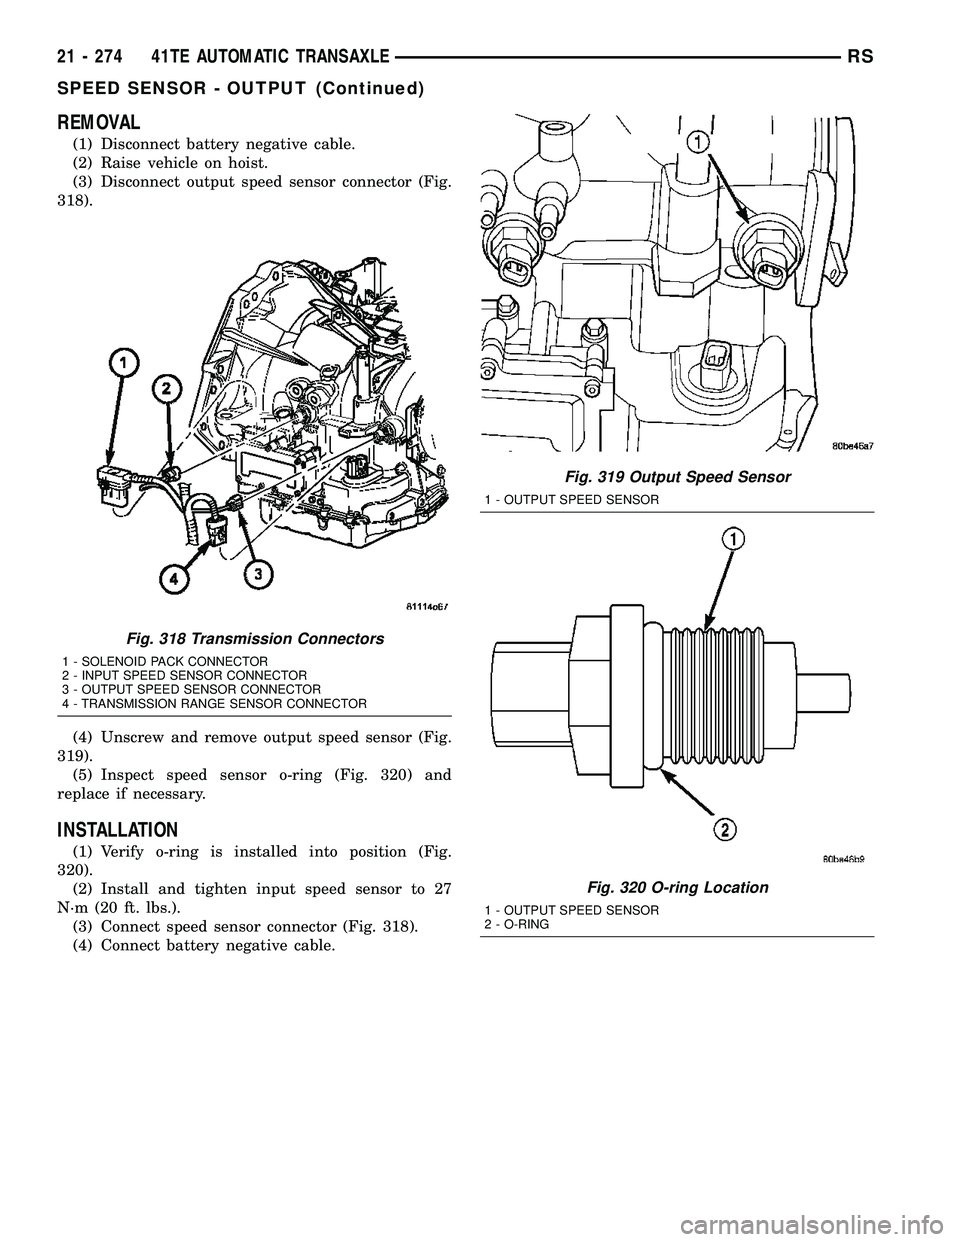 CHRYSLER VOYAGER 2005  Service Manual REMOVAL
(1) Disconnect battery negative cable.
(2) Raise vehicle on hoist.
(3) Disconnect output speed sensor connector (Fig.
318).
(4) Unscrew and remove output speed sensor (Fig.
319).
(5) Inspect s